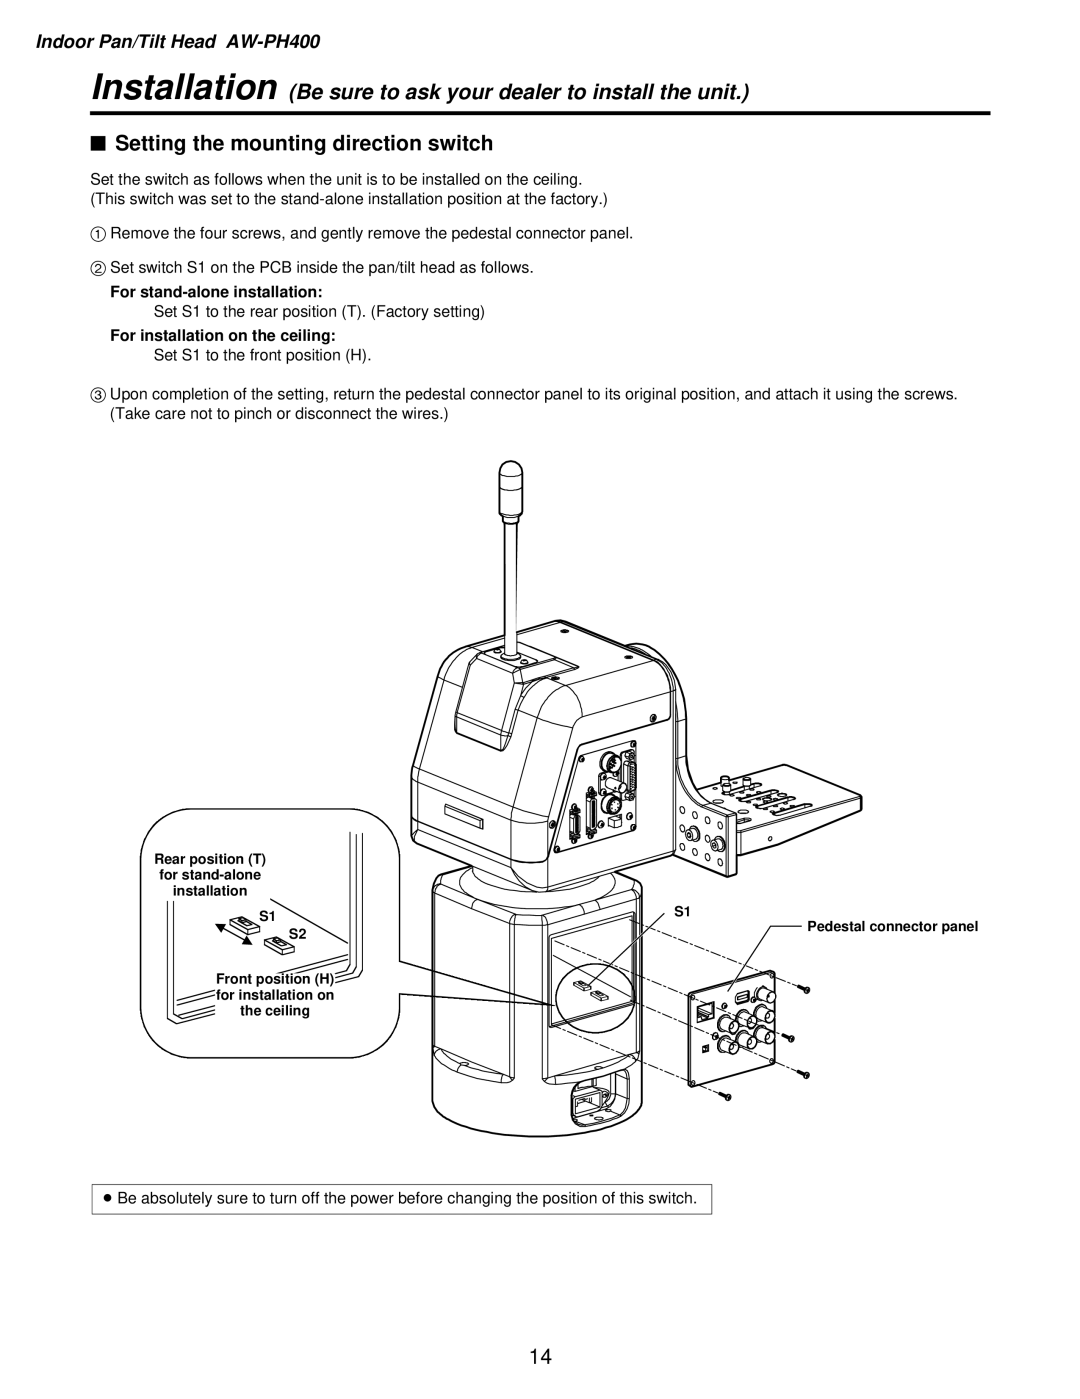 Panasonic AW-PH400P $ Setting the mounting direction switch, For stand-alone installation, For installation on the ceiling 